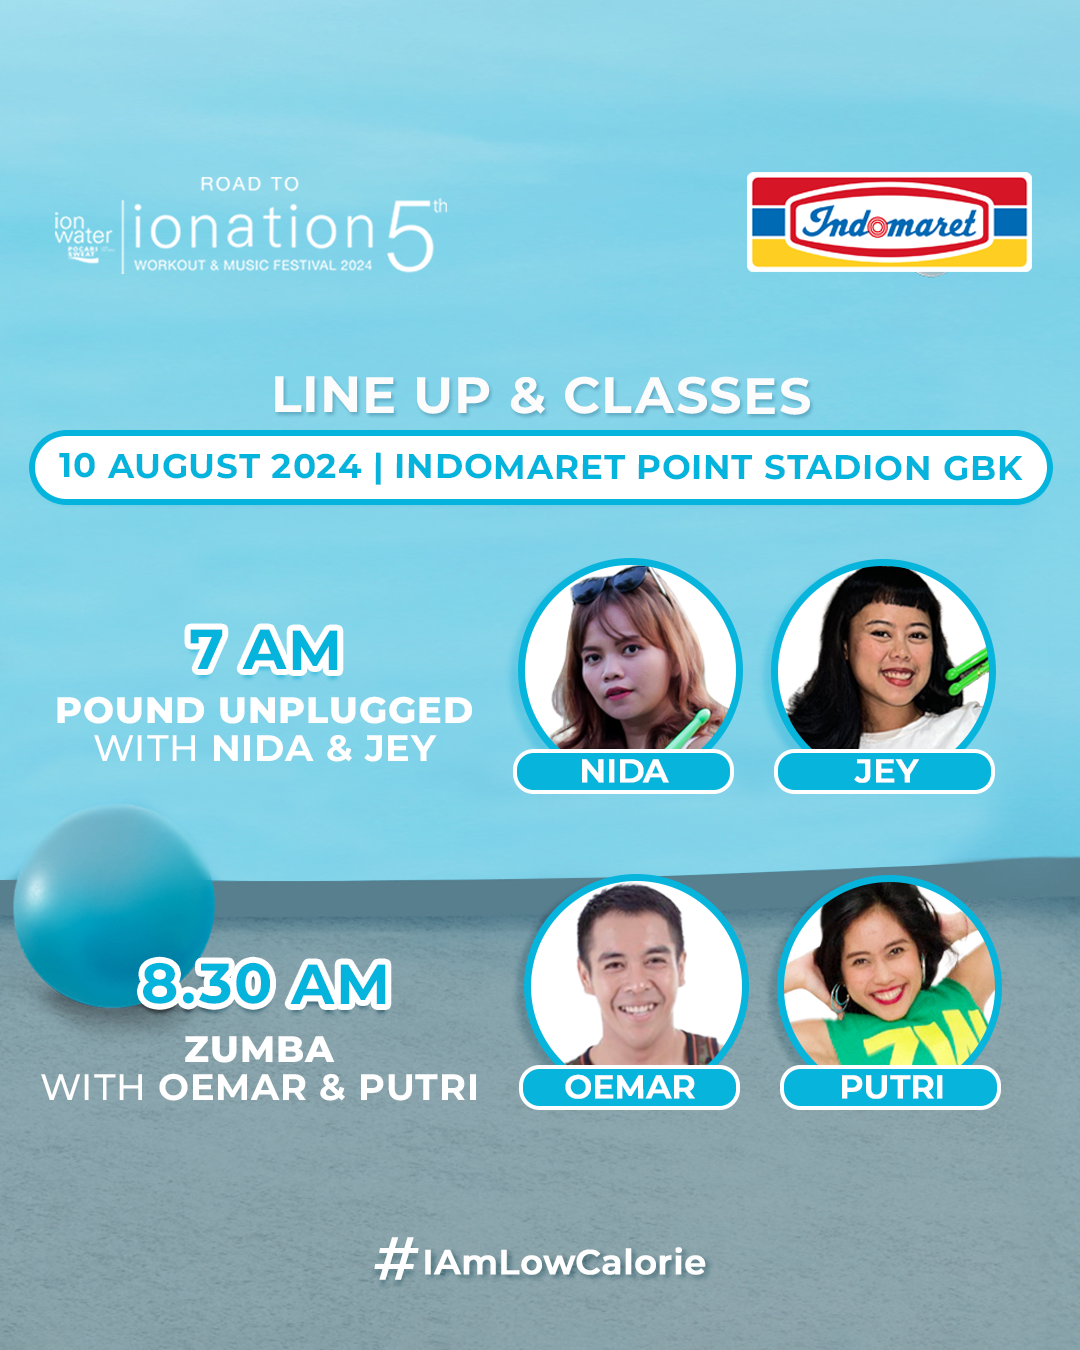 ROAD TO IONATION X INDOMARET ZUMBA WITH OEMAR & PUTRI 10 AGUSTUS 2024